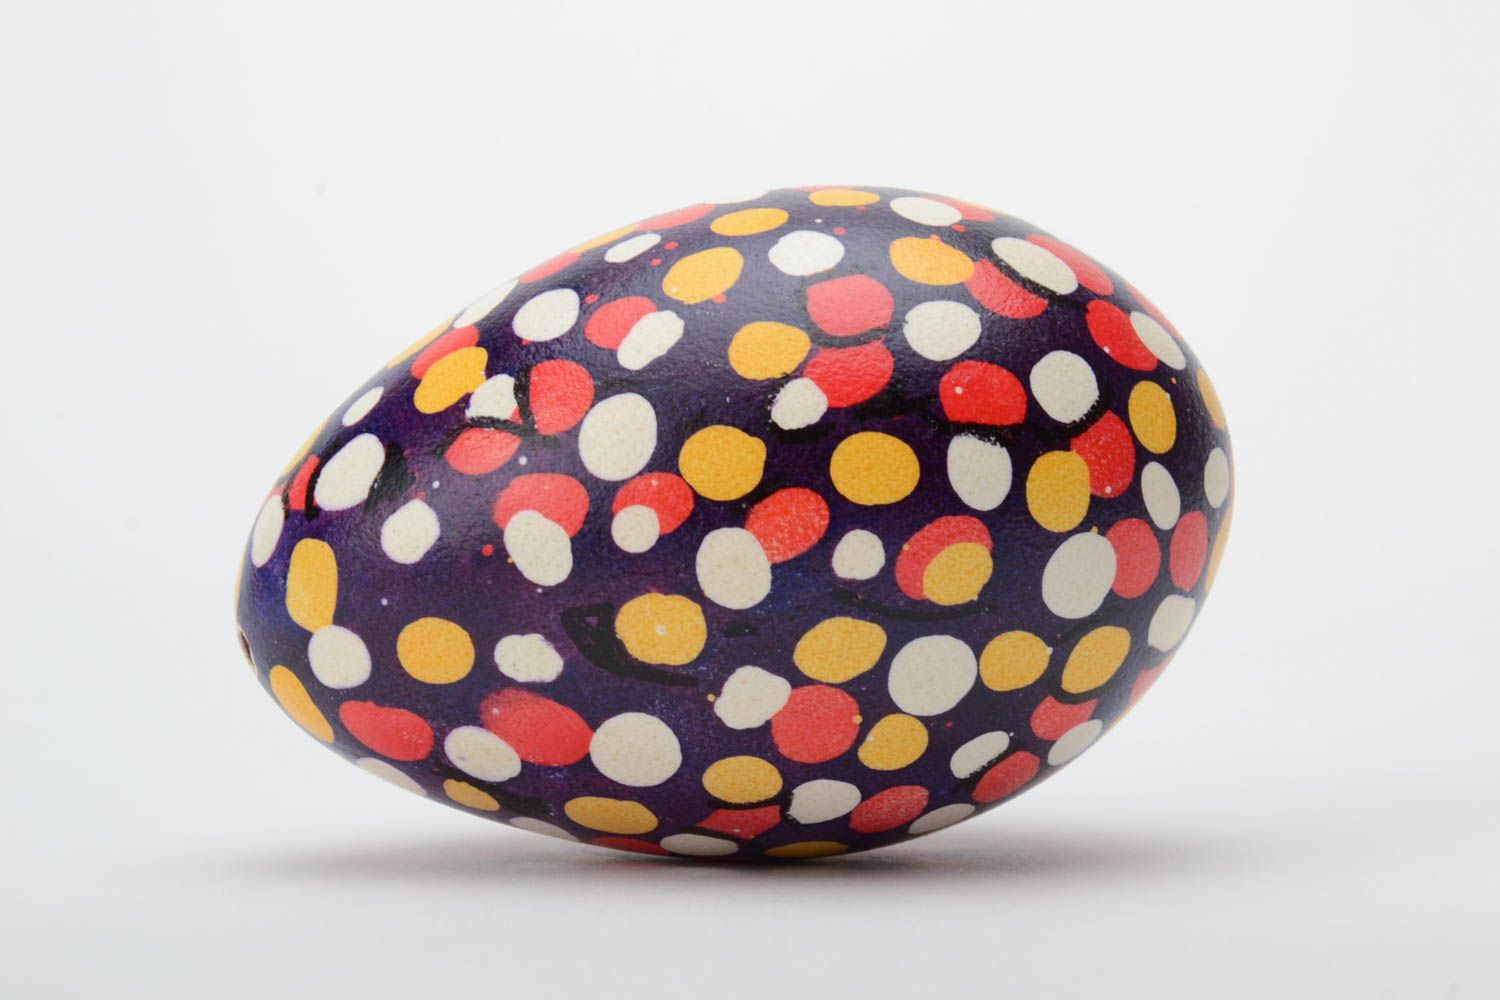 Handmade unusual Easter egg with colorful polka dot pattern on dark background photo 3